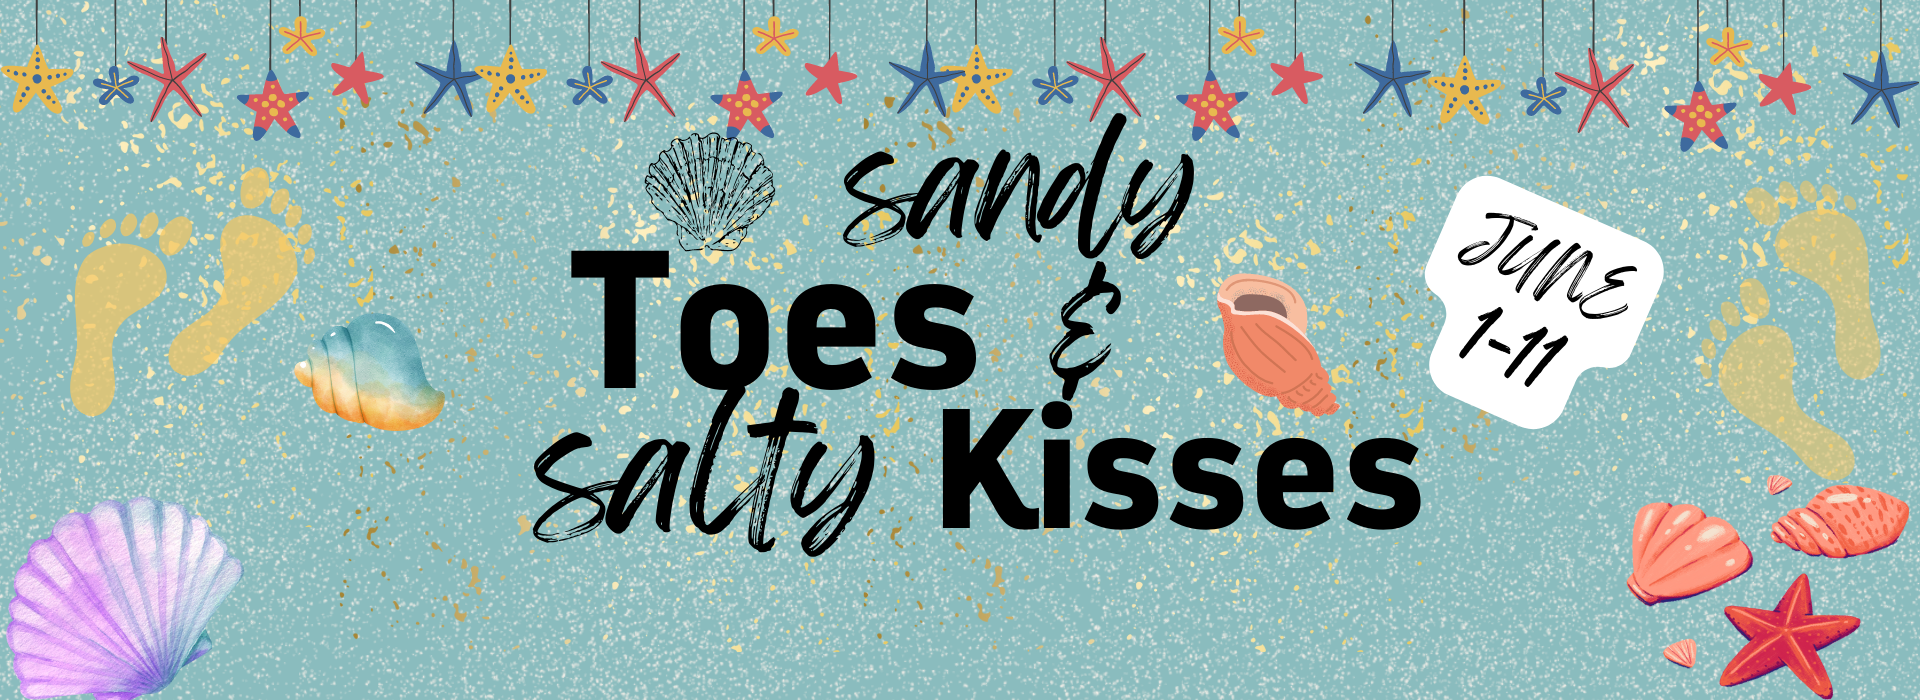 Sandy Toes and Sally Kisses